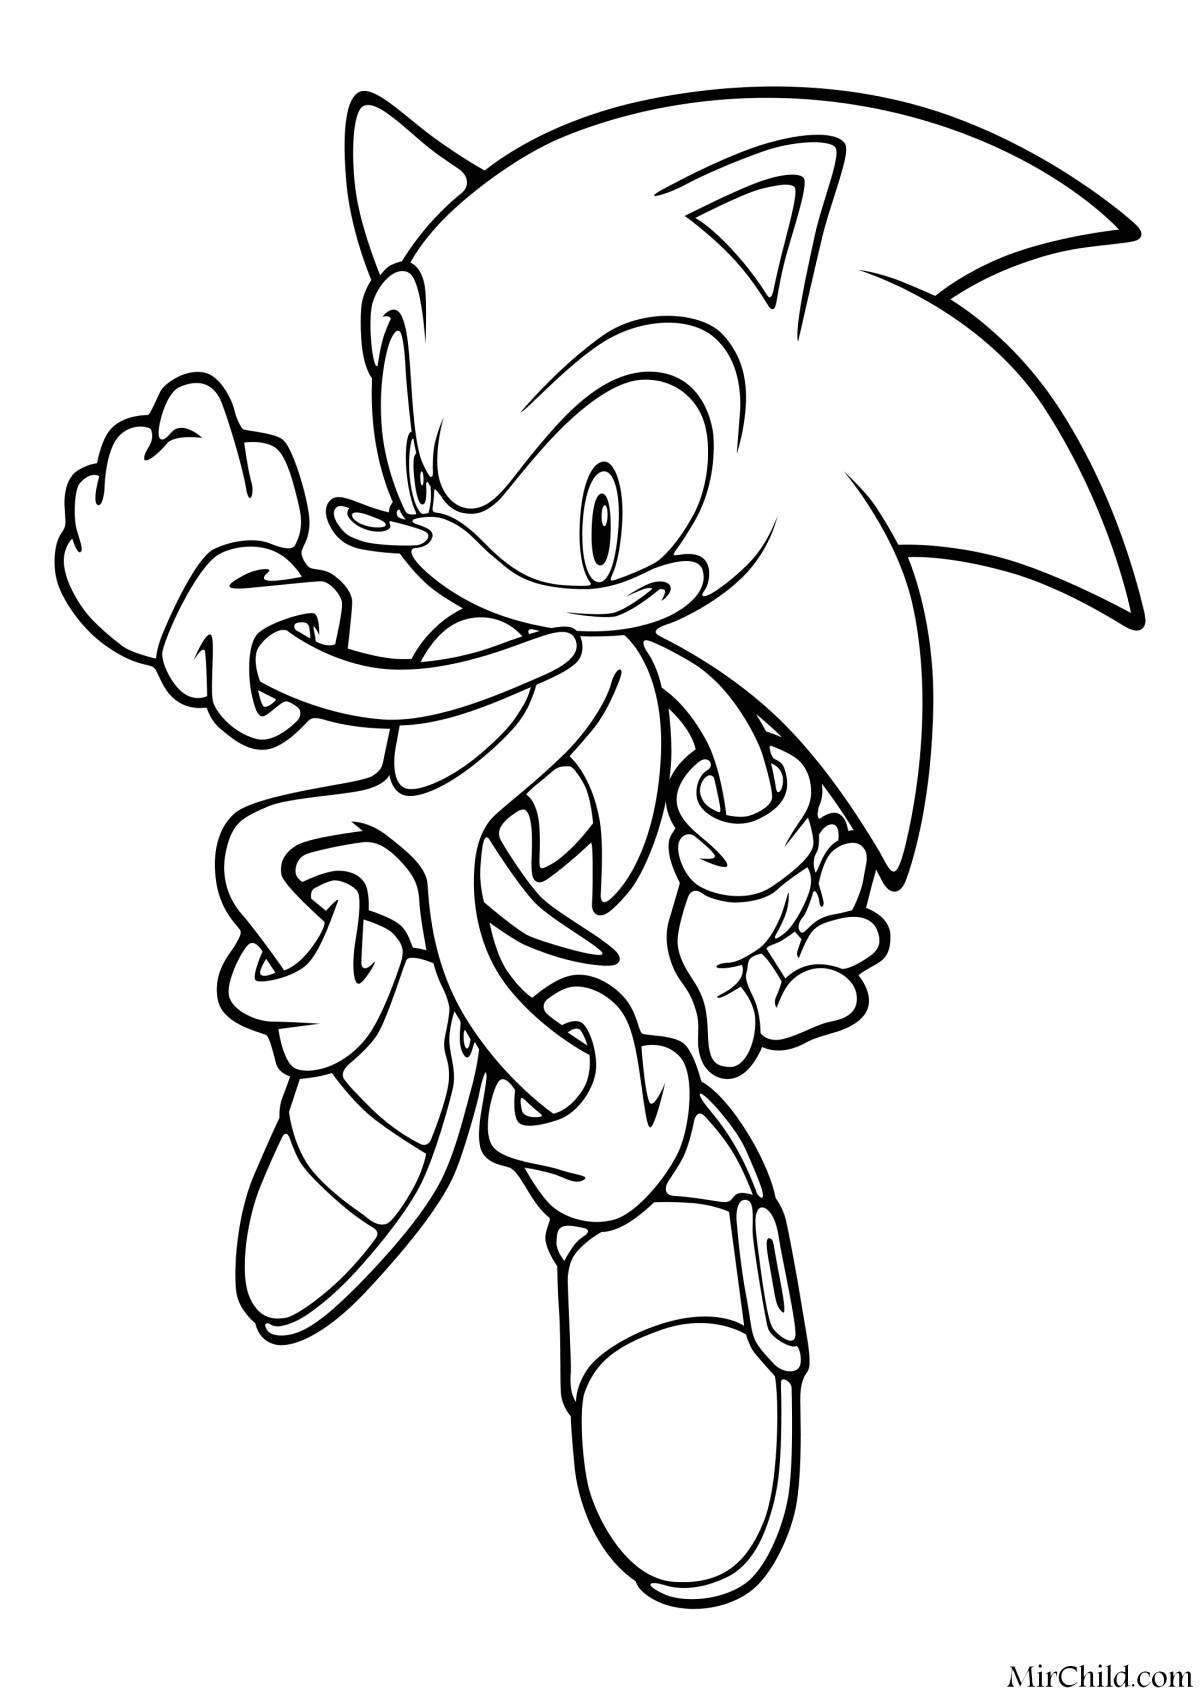 Colorful baby sonic coloring page